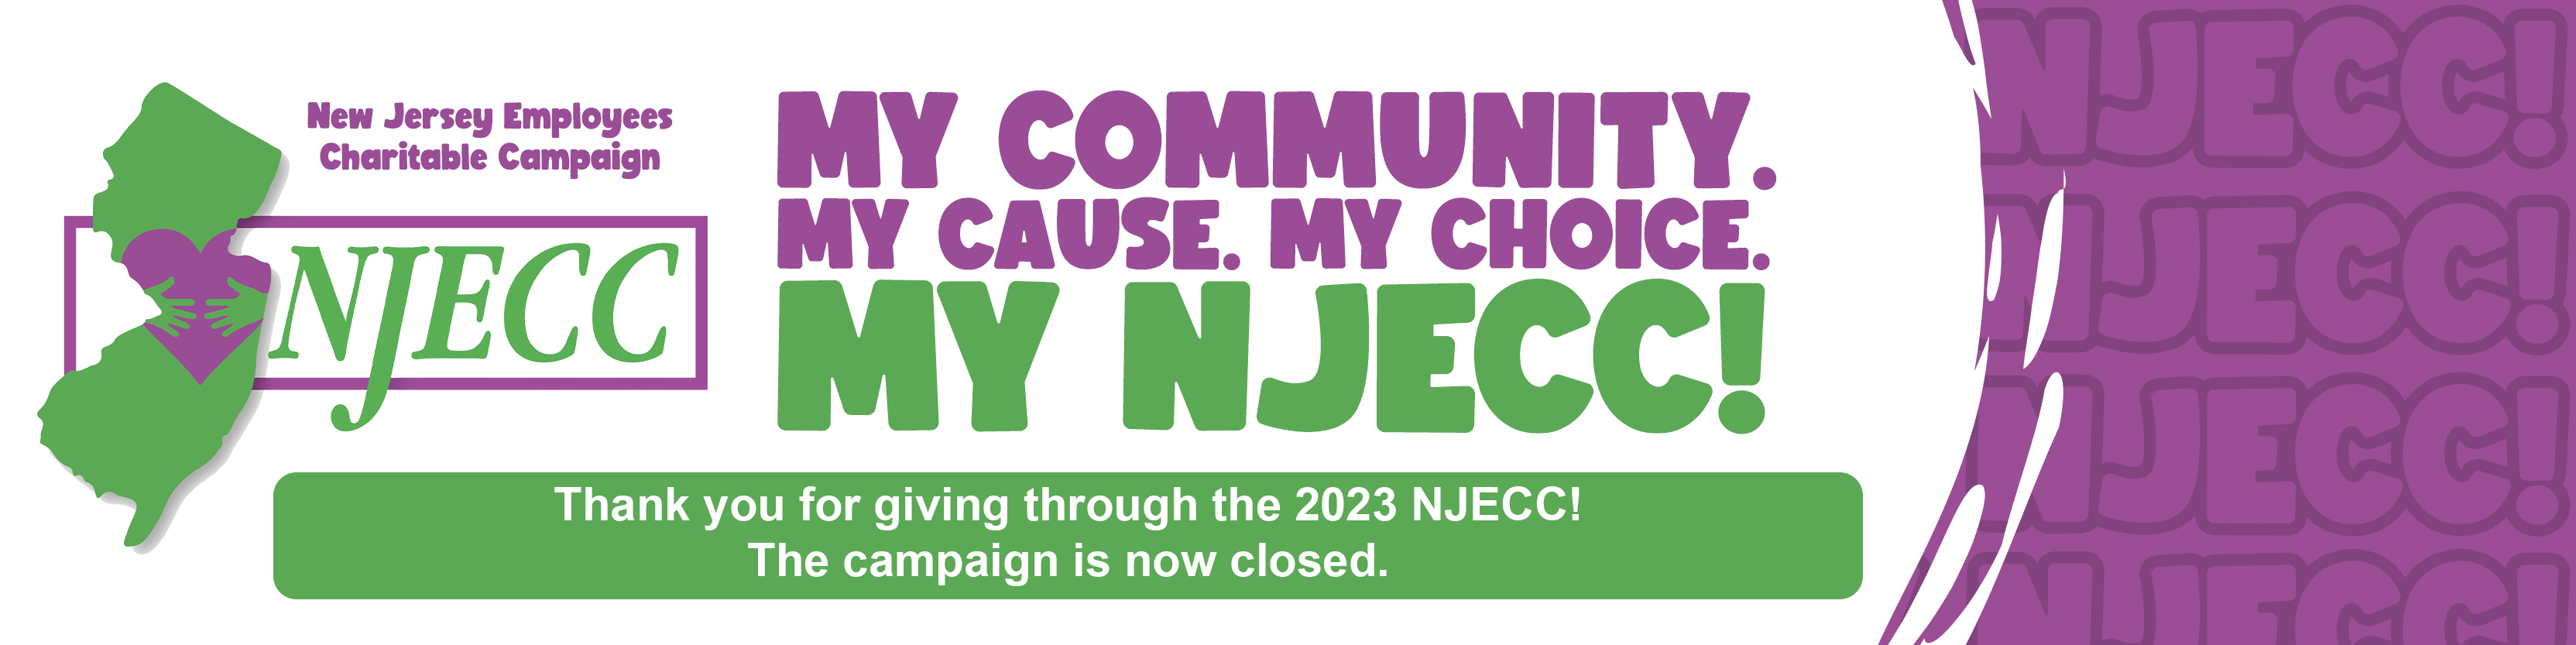 The 2023 NJECC campaign is closed. Thank you for giving!